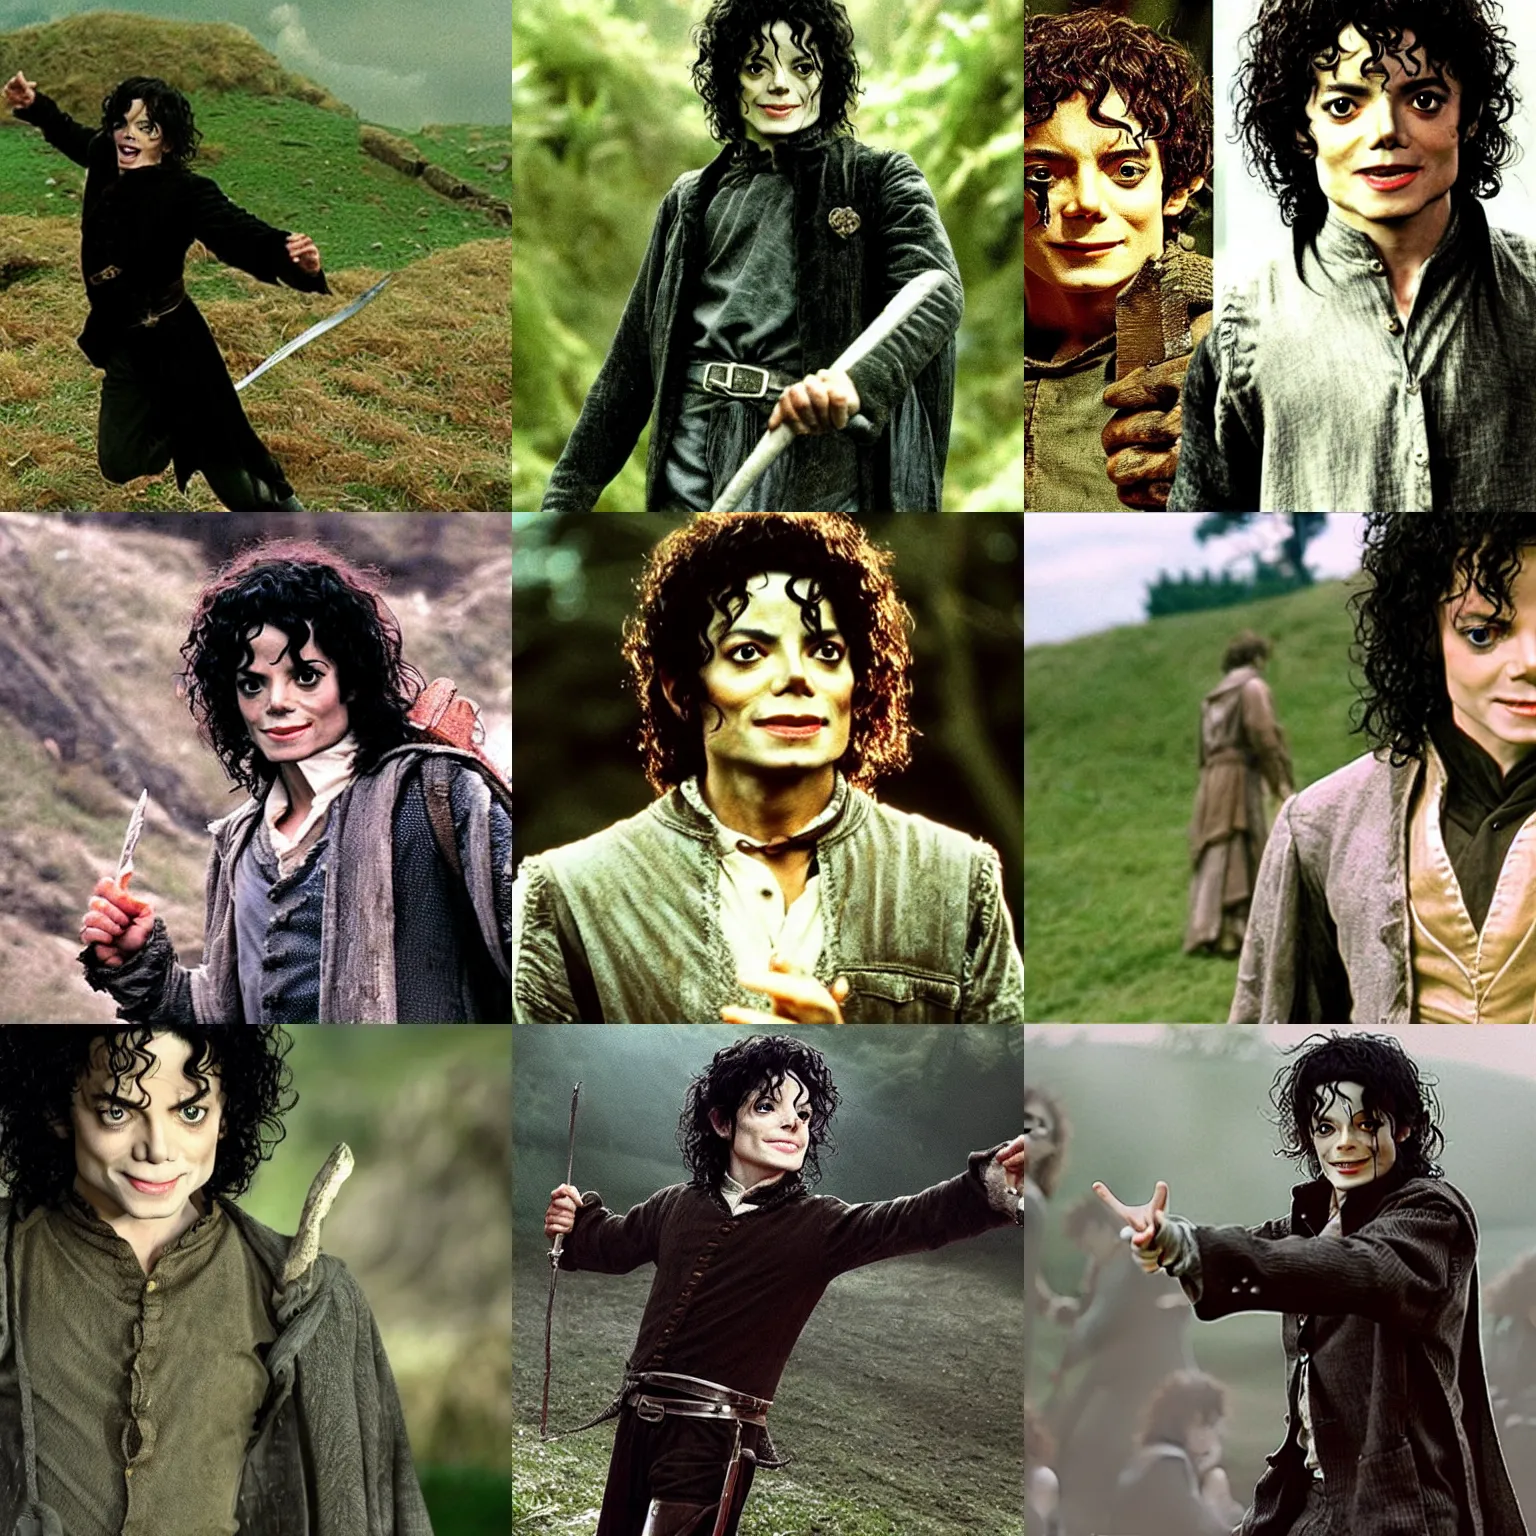 Prompt: Michael Jackson as Frodo Baggins, still image from Lord of the Rings